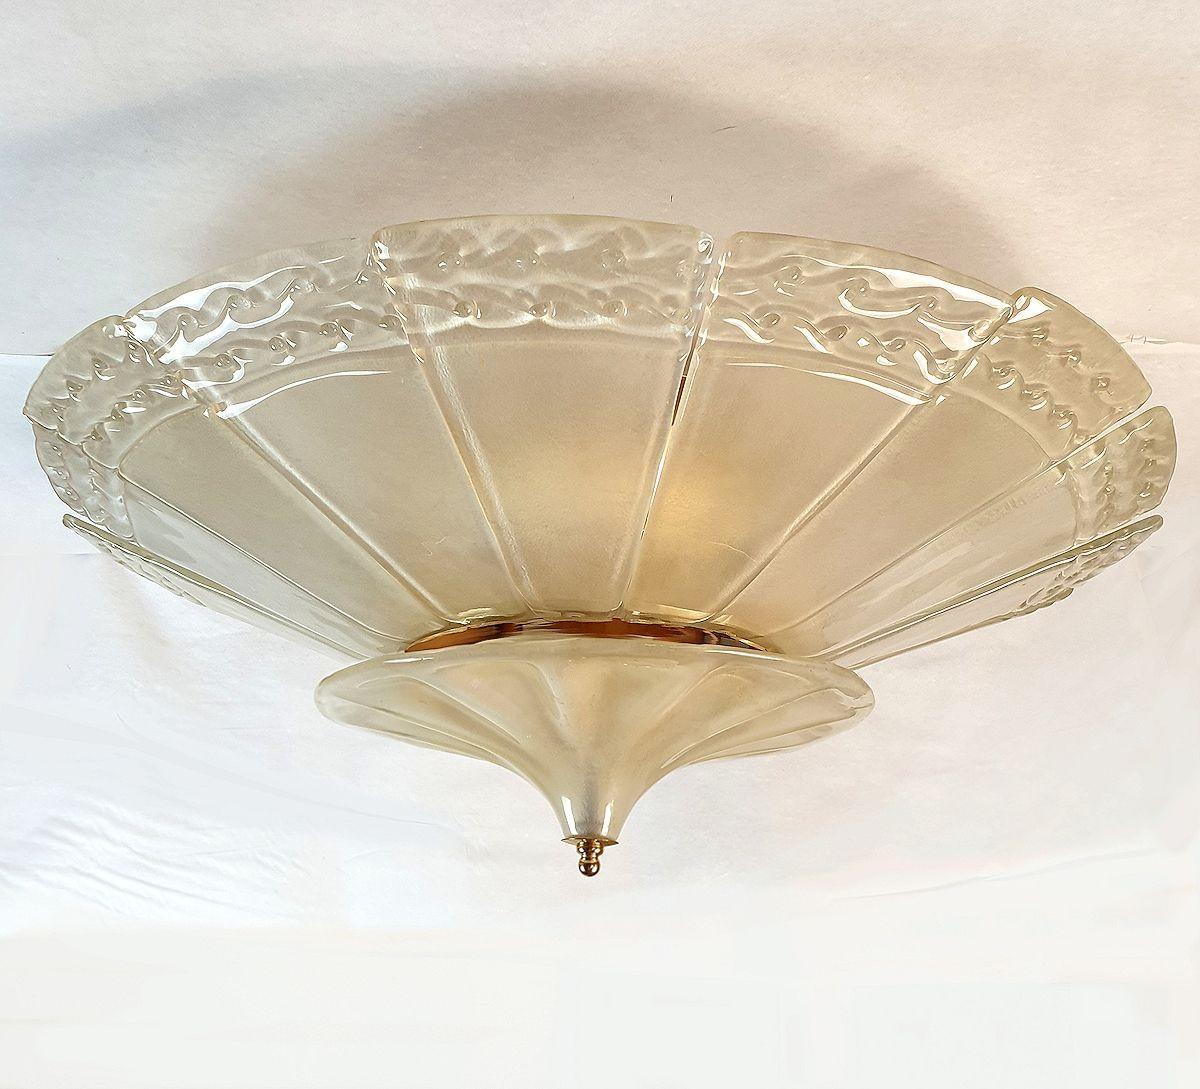 Mid Century Modern Murano glass flush mount chandelier, attributed to Seguso, Italy 1960s.
The elegant vintage Murano chandelier has an Art Deco and even a 1900's Chinese style touch.
The Murano glass is frosted inside, and soft and shiny outside,